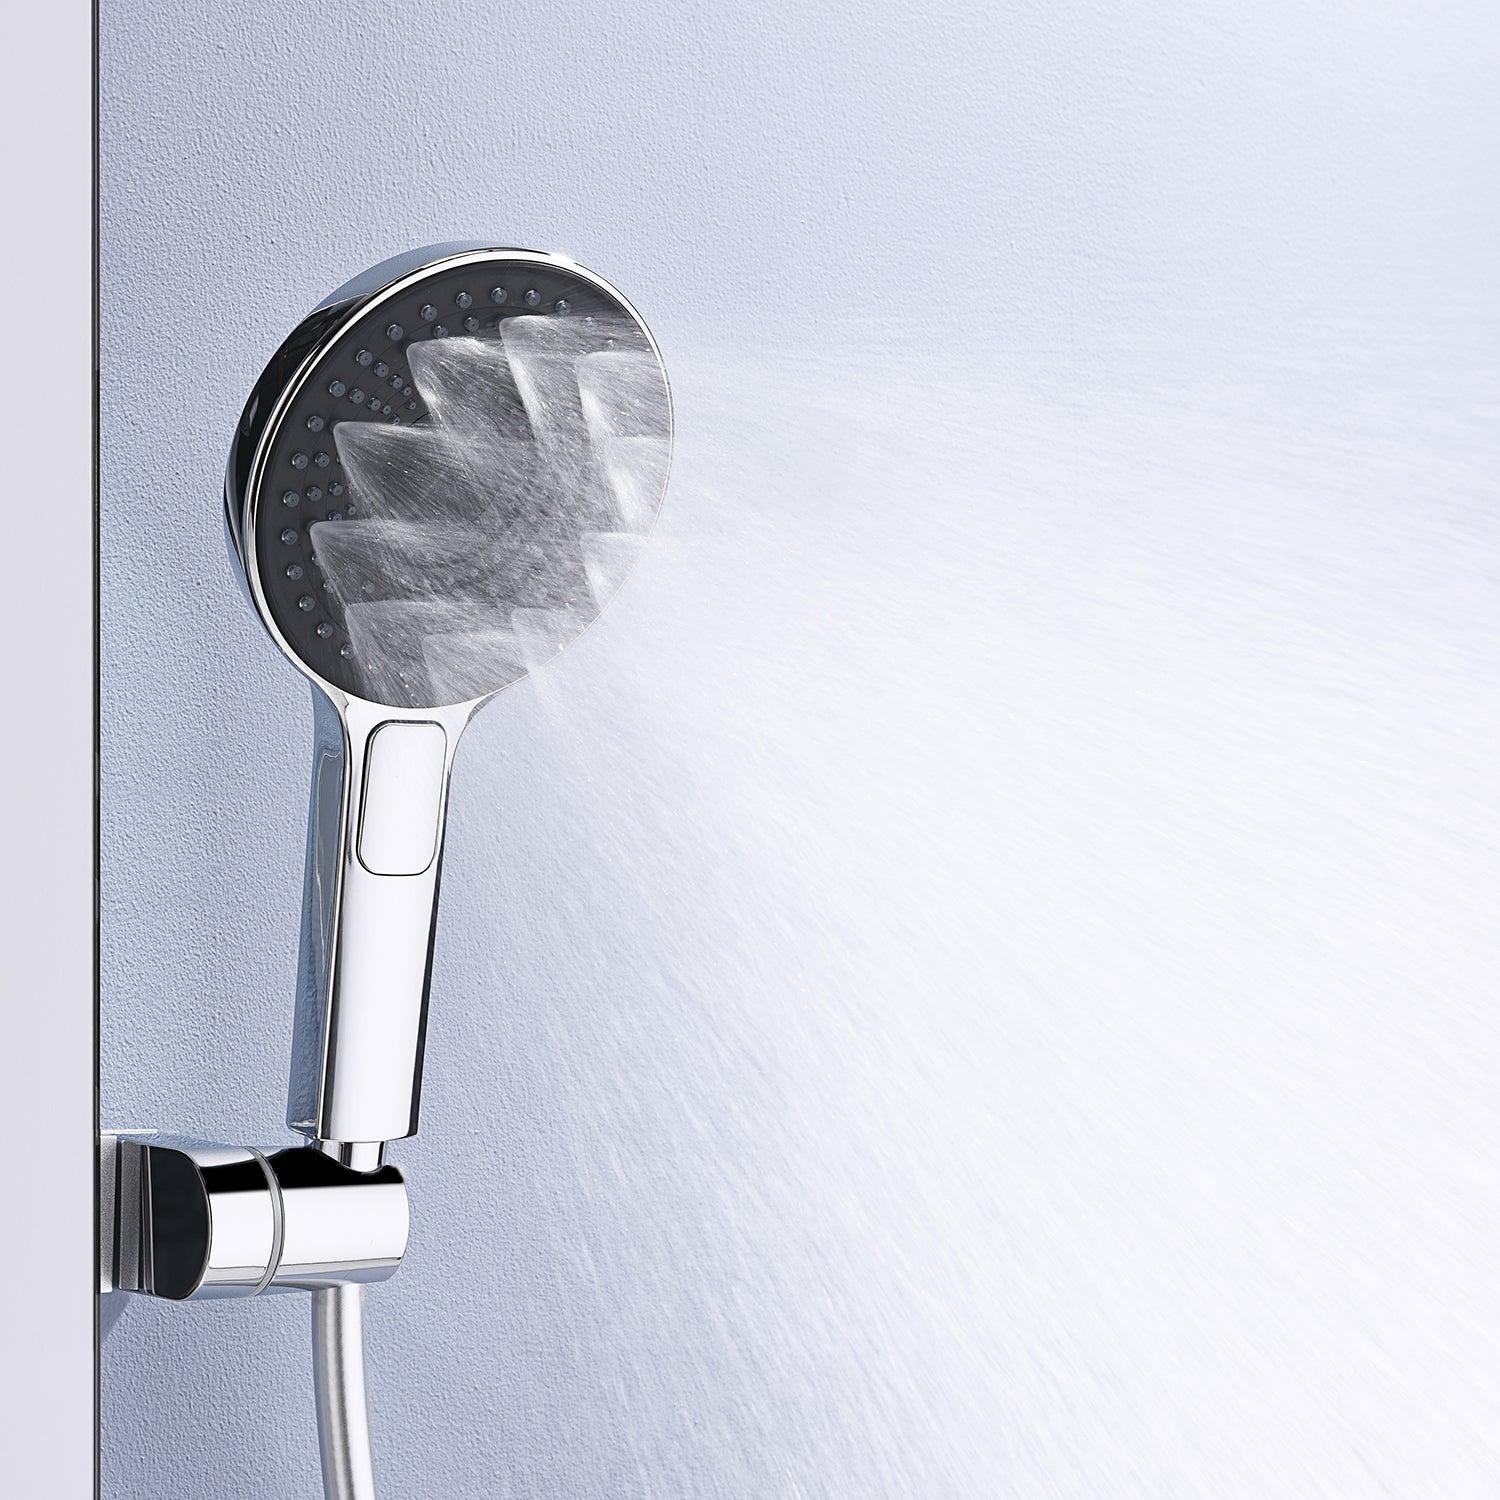 State-of-the-Art Shower System with Rainfall Shower head